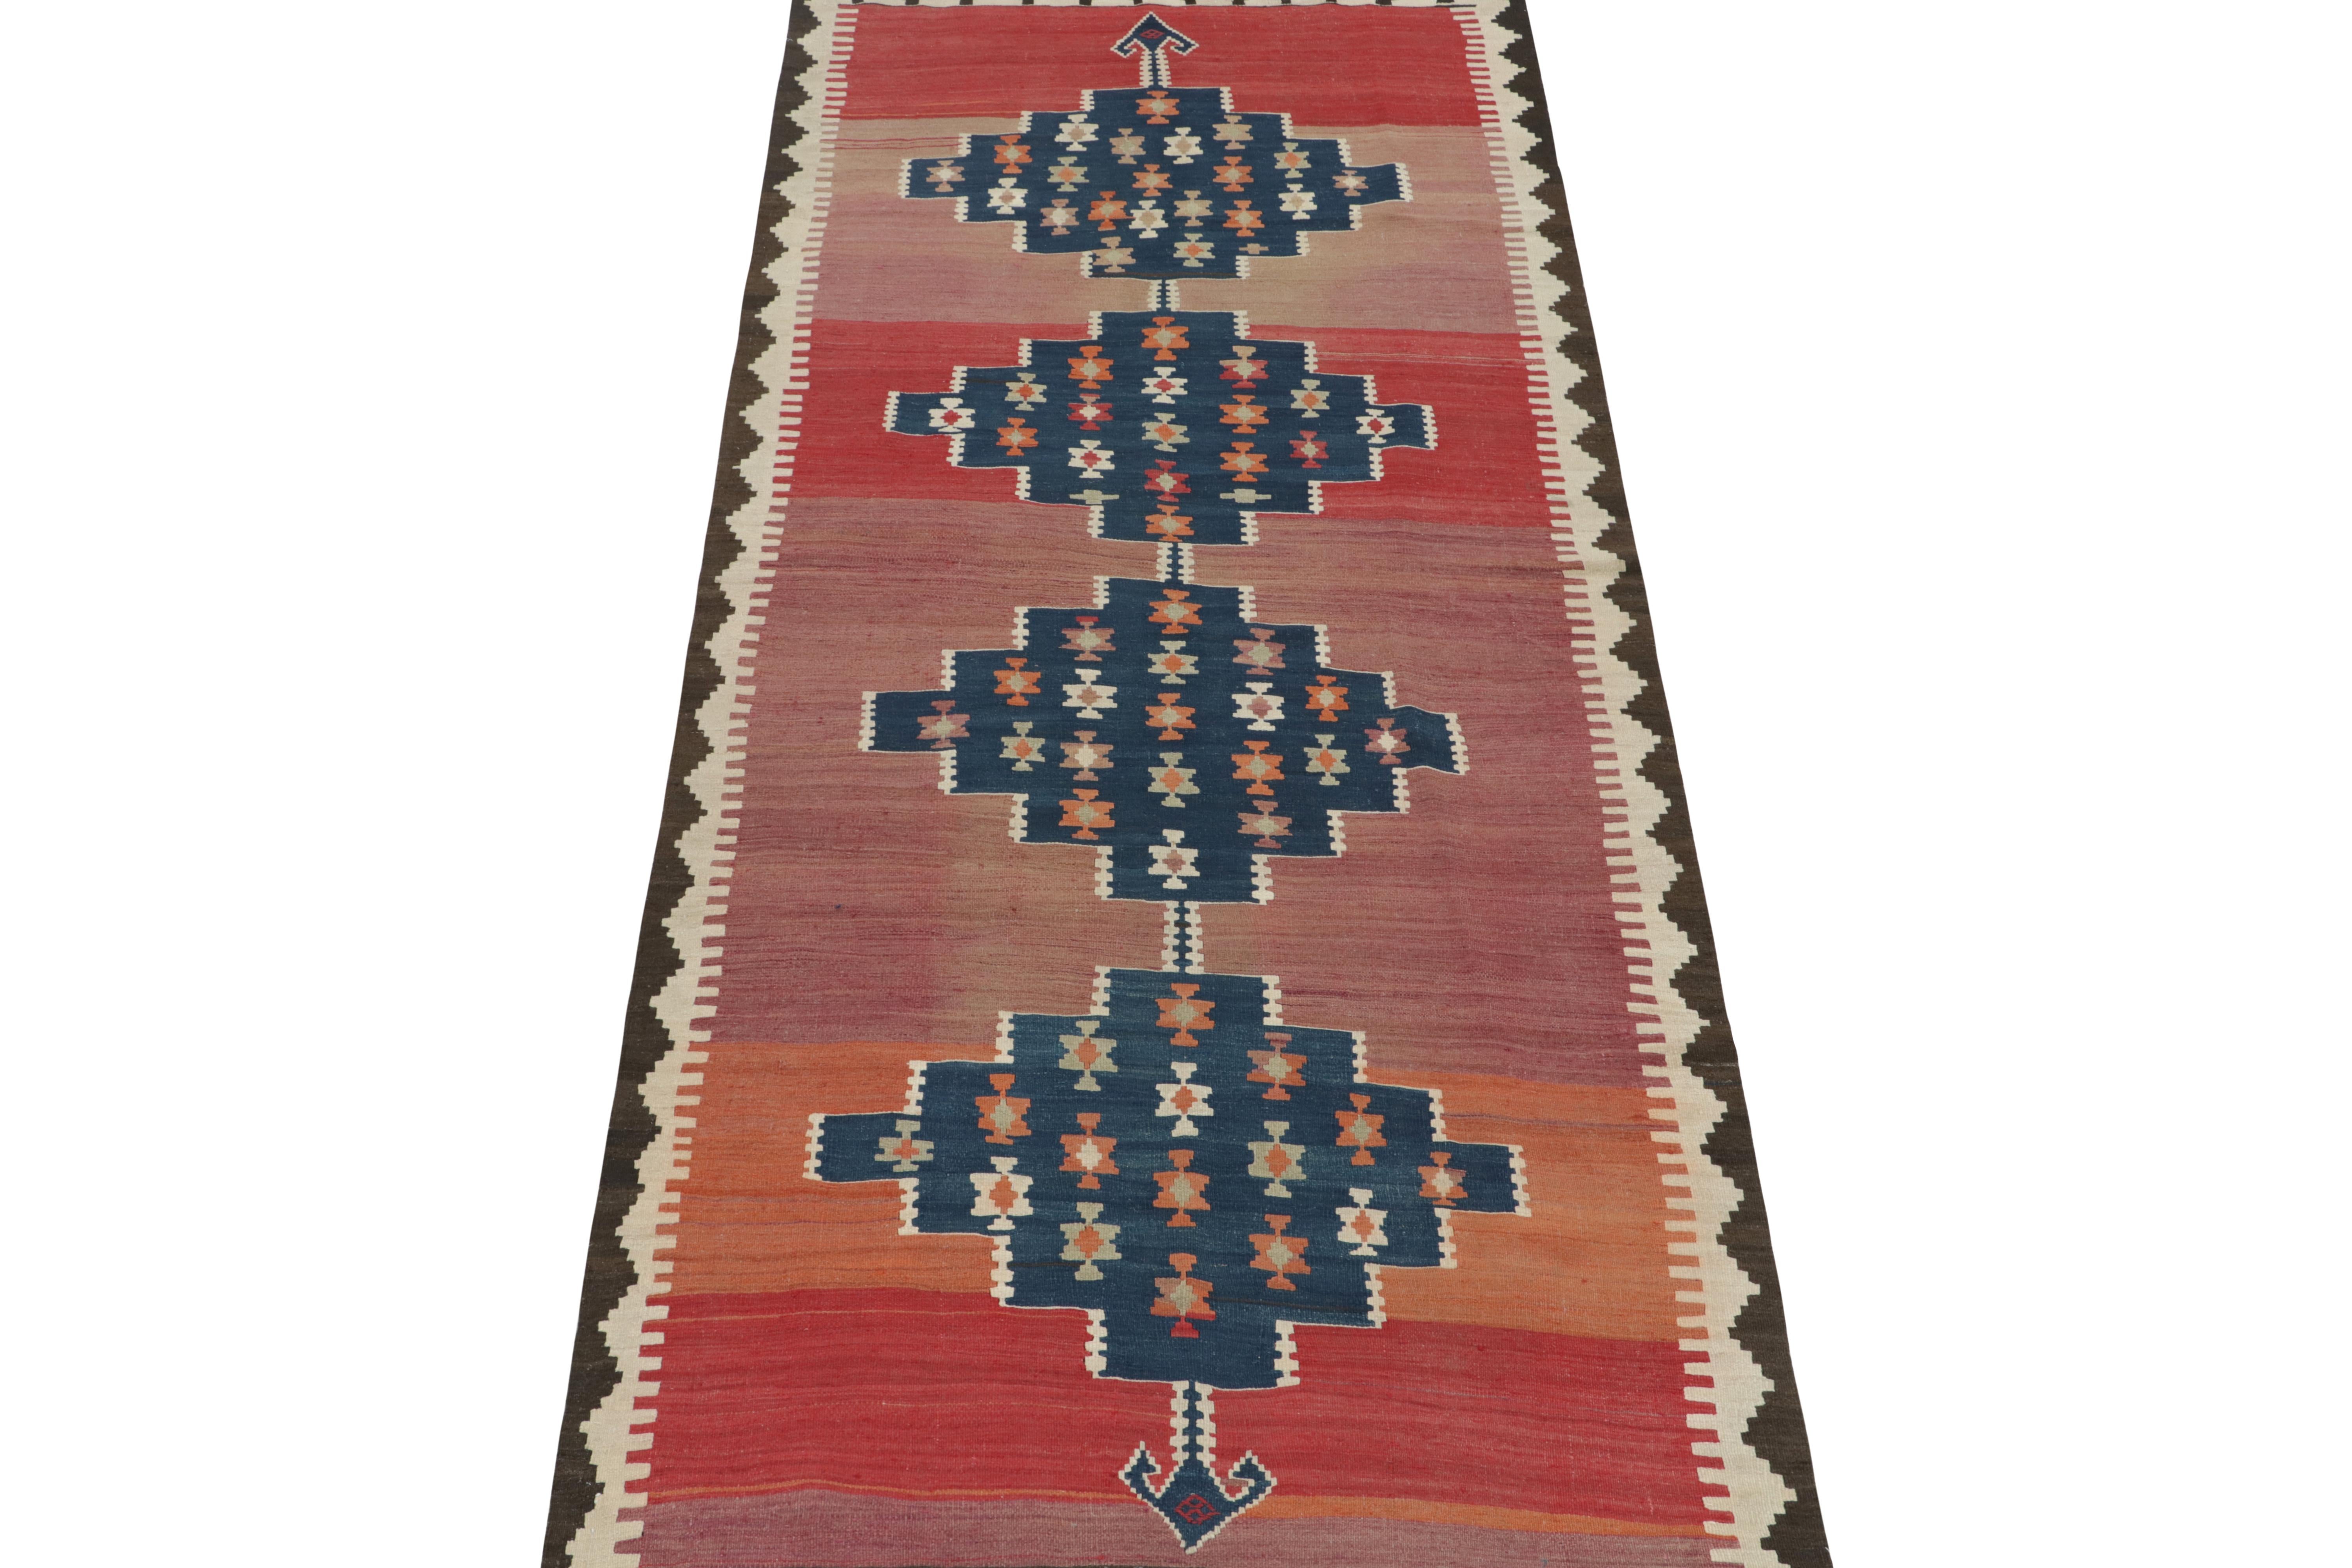 This vintage 5x12 Shahsavan kilim is an interesting tribal rug for its period and lineage. Handwoven in wool, it’s believed to originate circa 1950-1960. 

Further on the Design:

The design prefers blue medallions on a polychromatic open field,